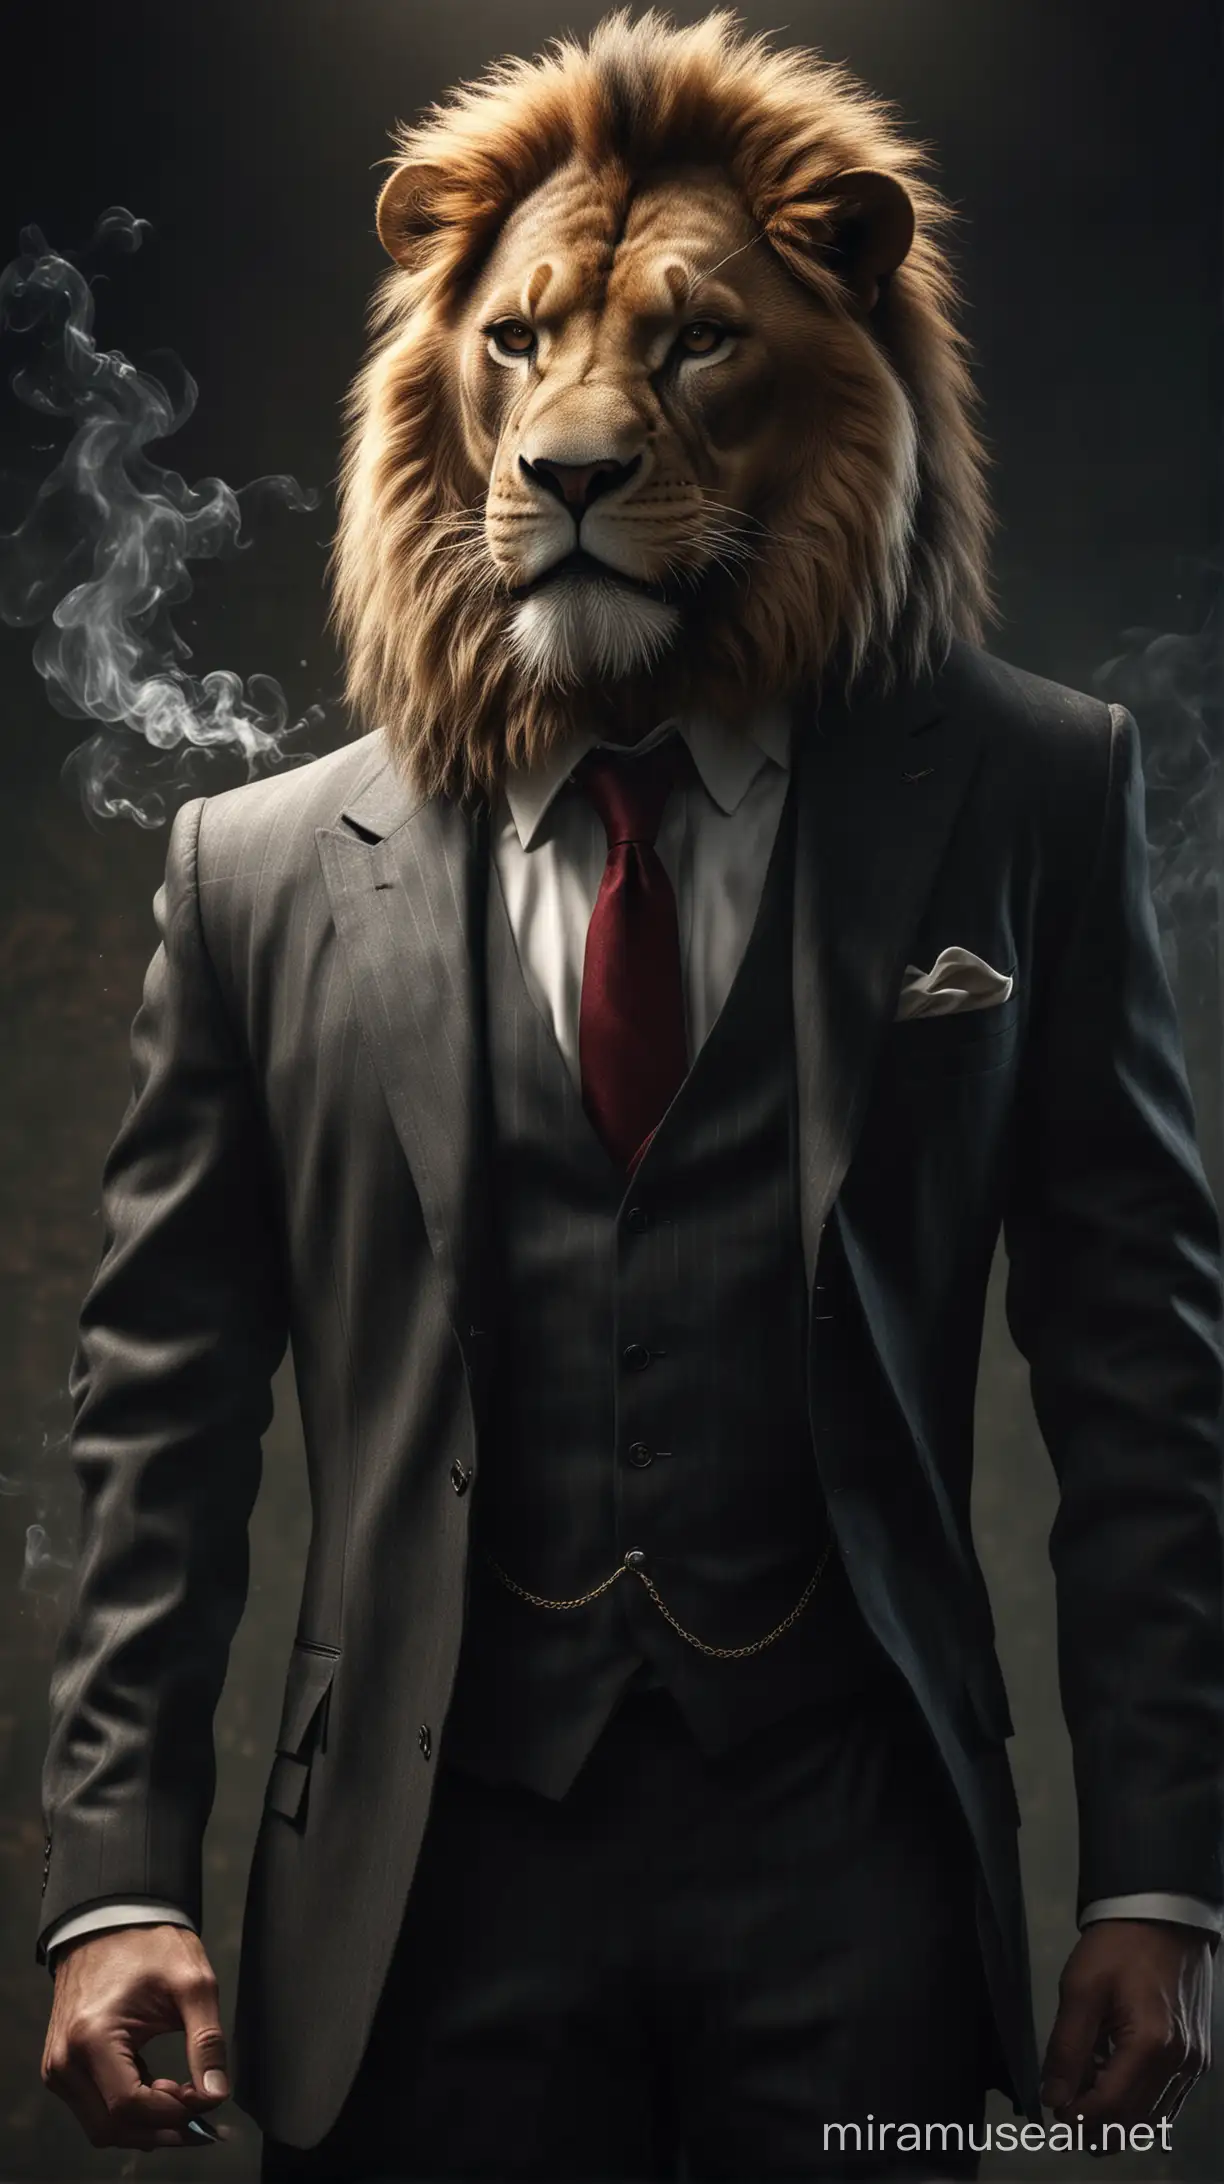 Highly Detail Lion in a Suit, Human Pose, Mafia Style, Realisim, Lights ahead, Dark, Smoking, standing